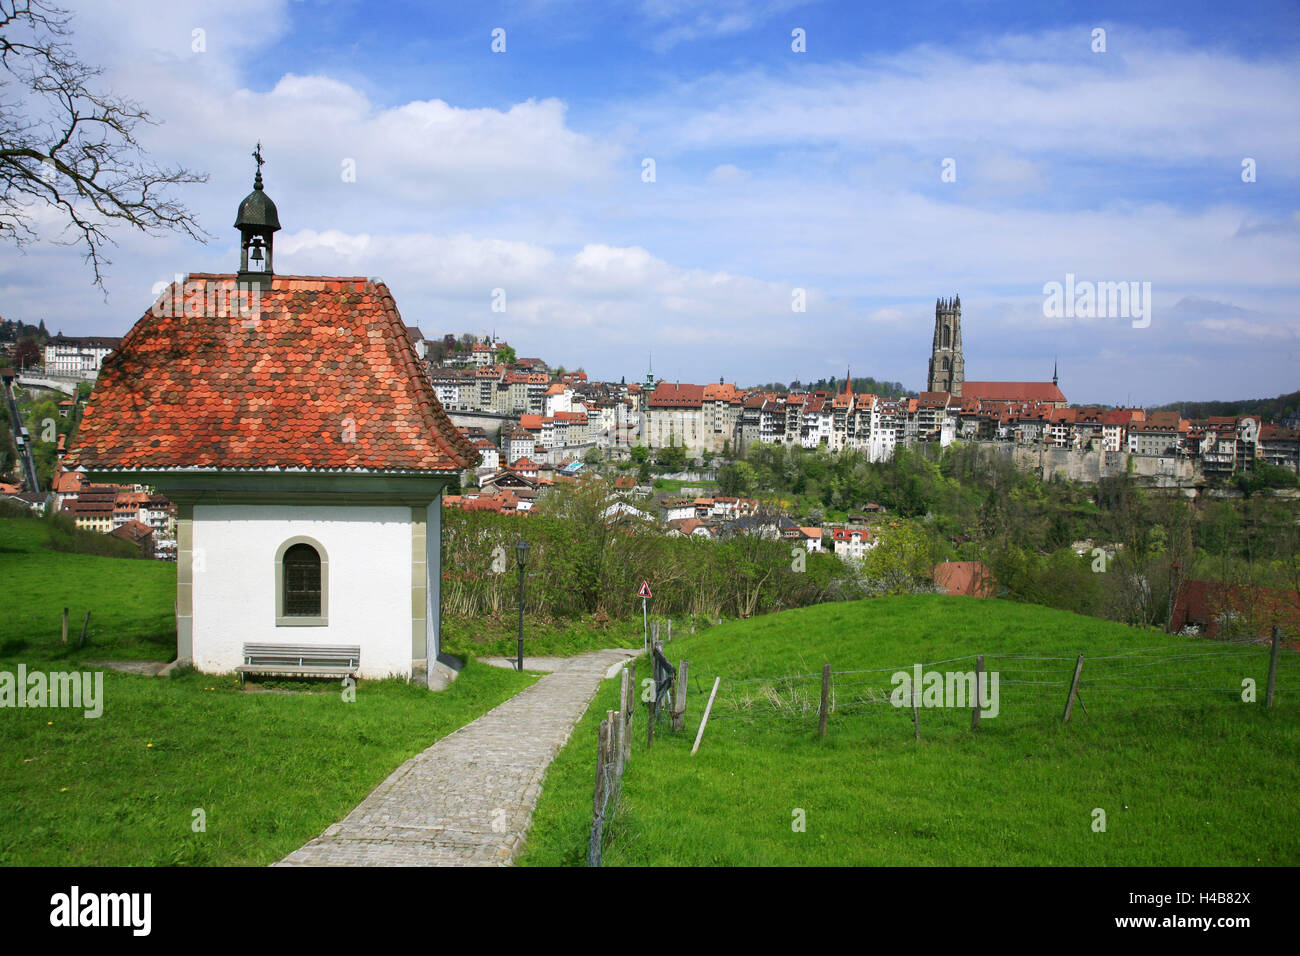 Switzerland, Fribourg on the Sarine River, chapel on the meadows of the 'Convent de Montorge', view from the Old Town of Fribourg with the Cathedral of Nicholas, Stock Photo